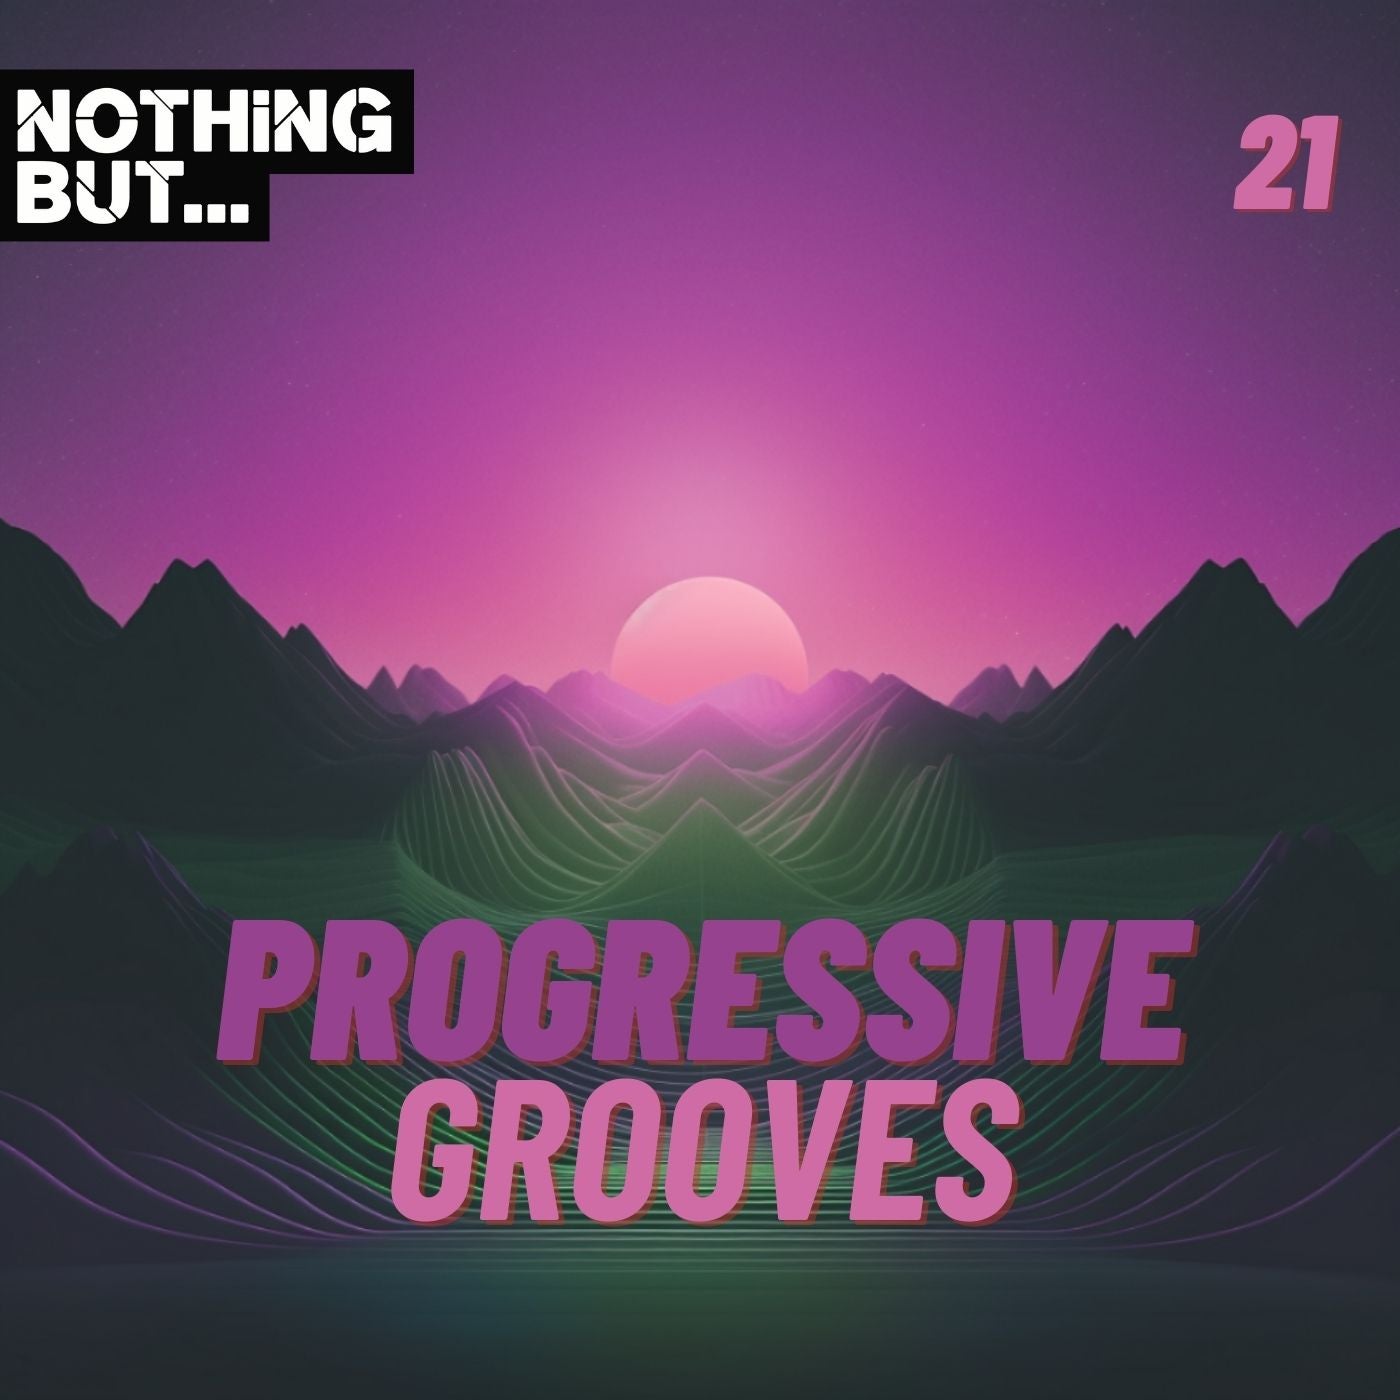 Nothing But... Progressive Grooves, Vol. 21